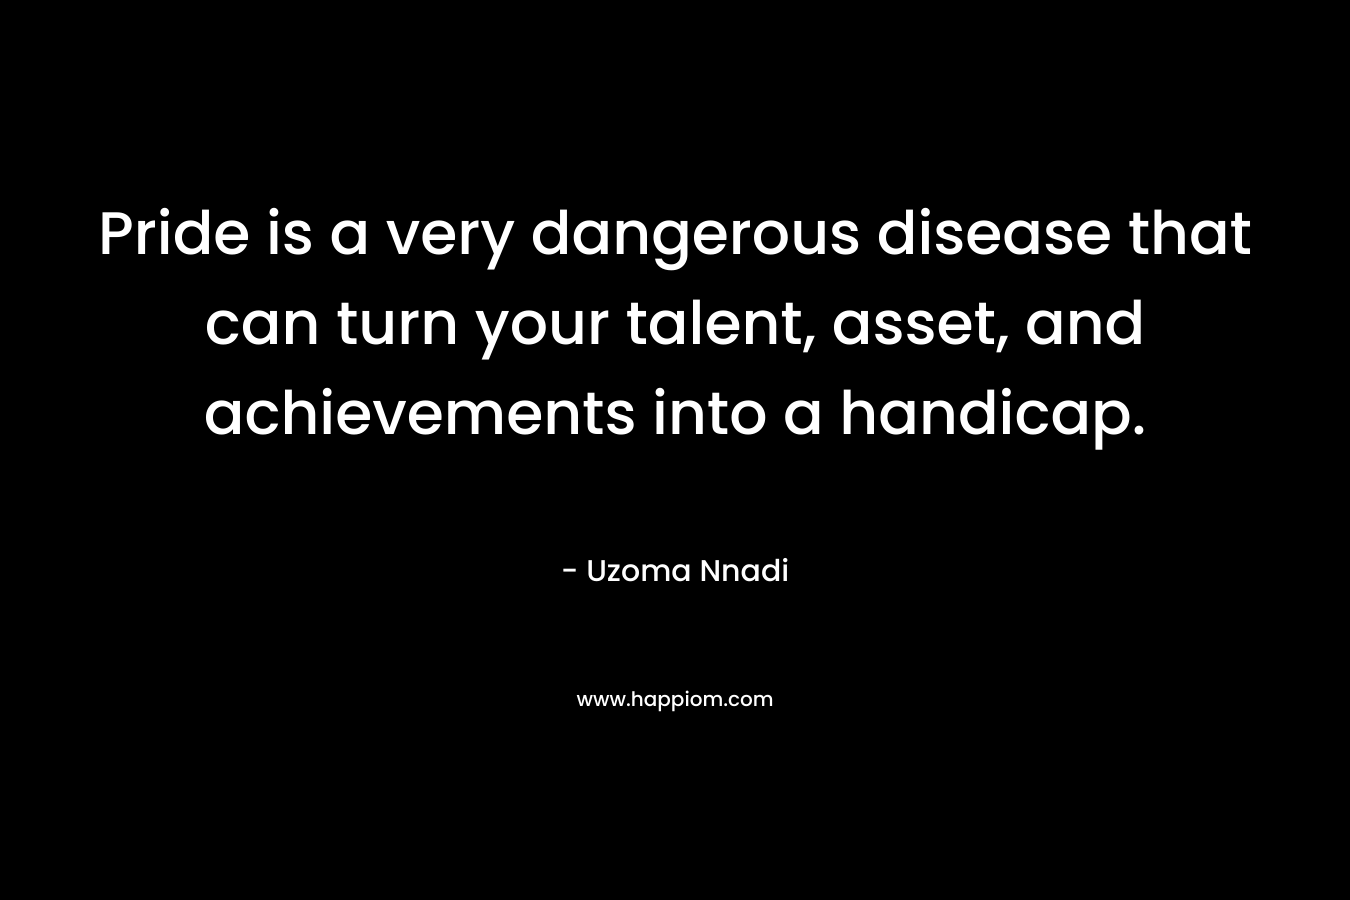 Pride is a very dangerous disease that can turn your talent, asset, and achievements into a handicap.